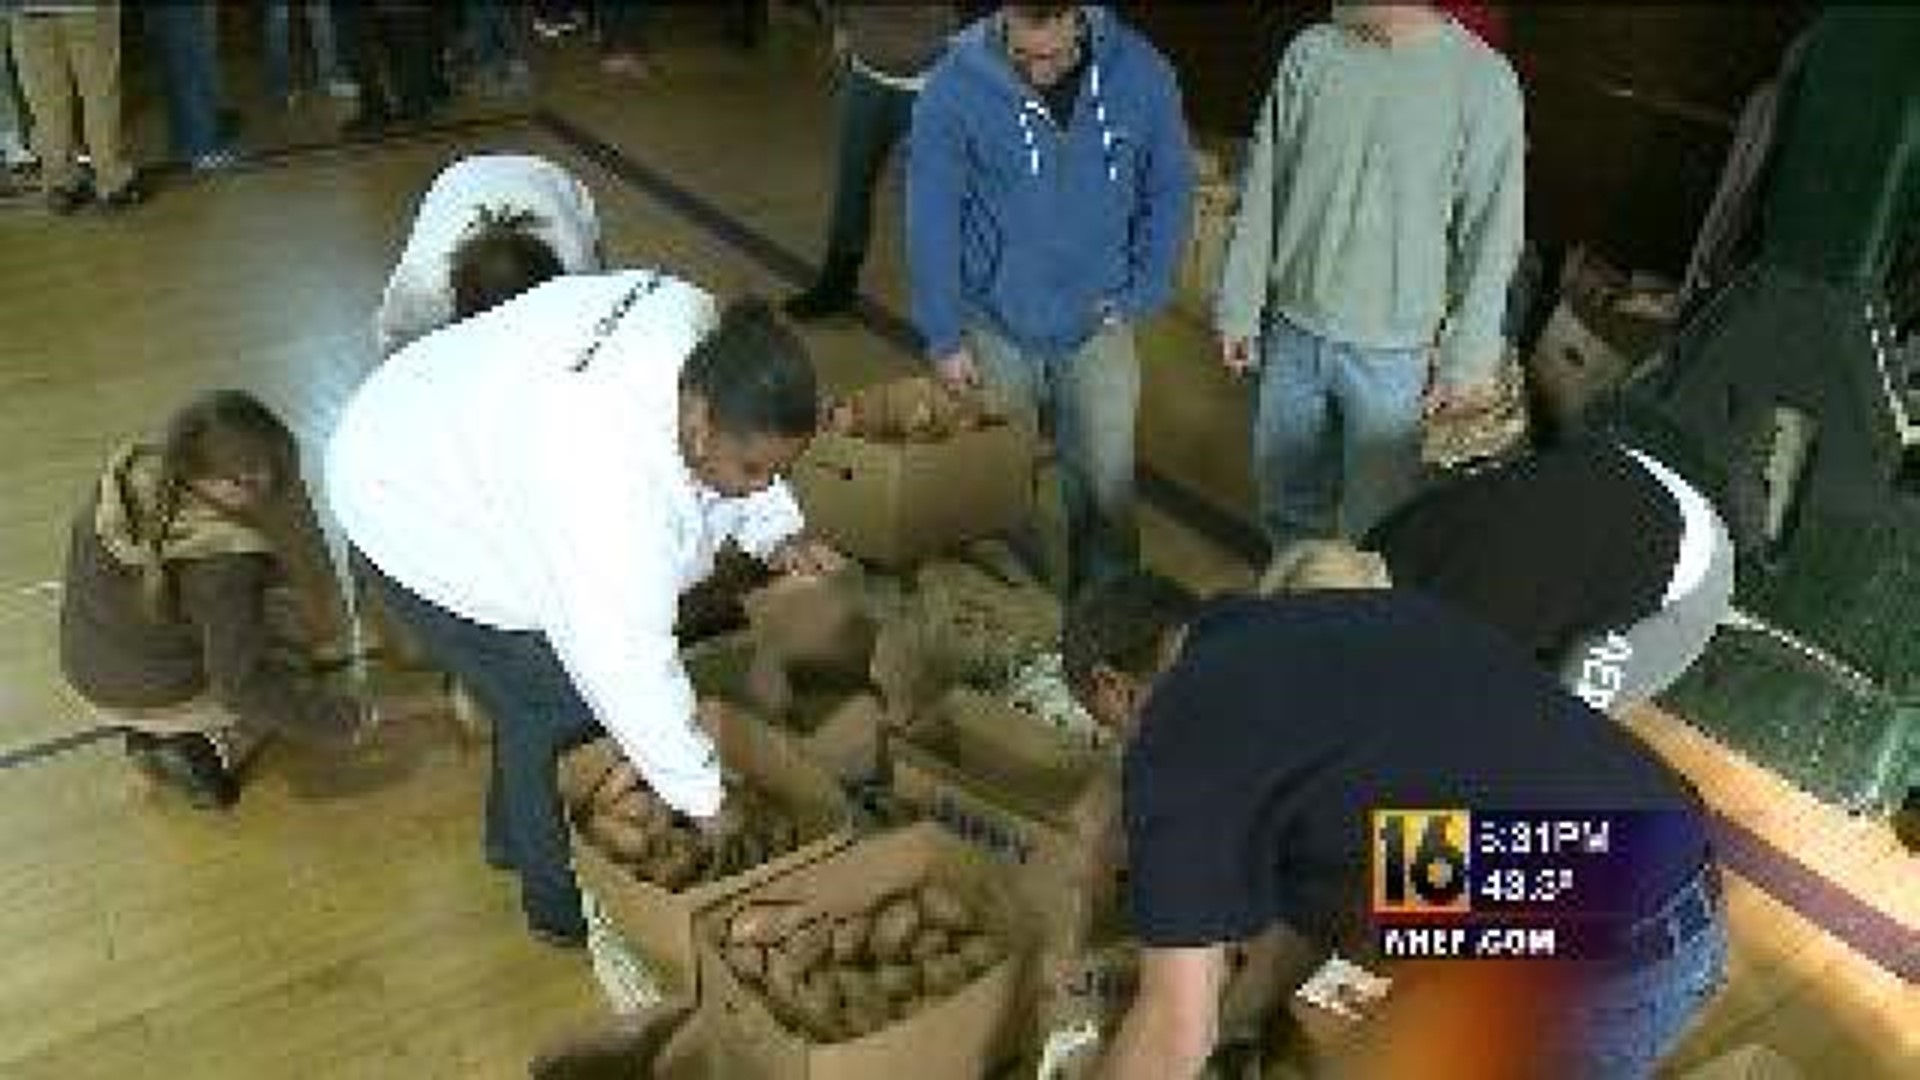 Your "Feed a Friend" Donations Go to Families in Scranton